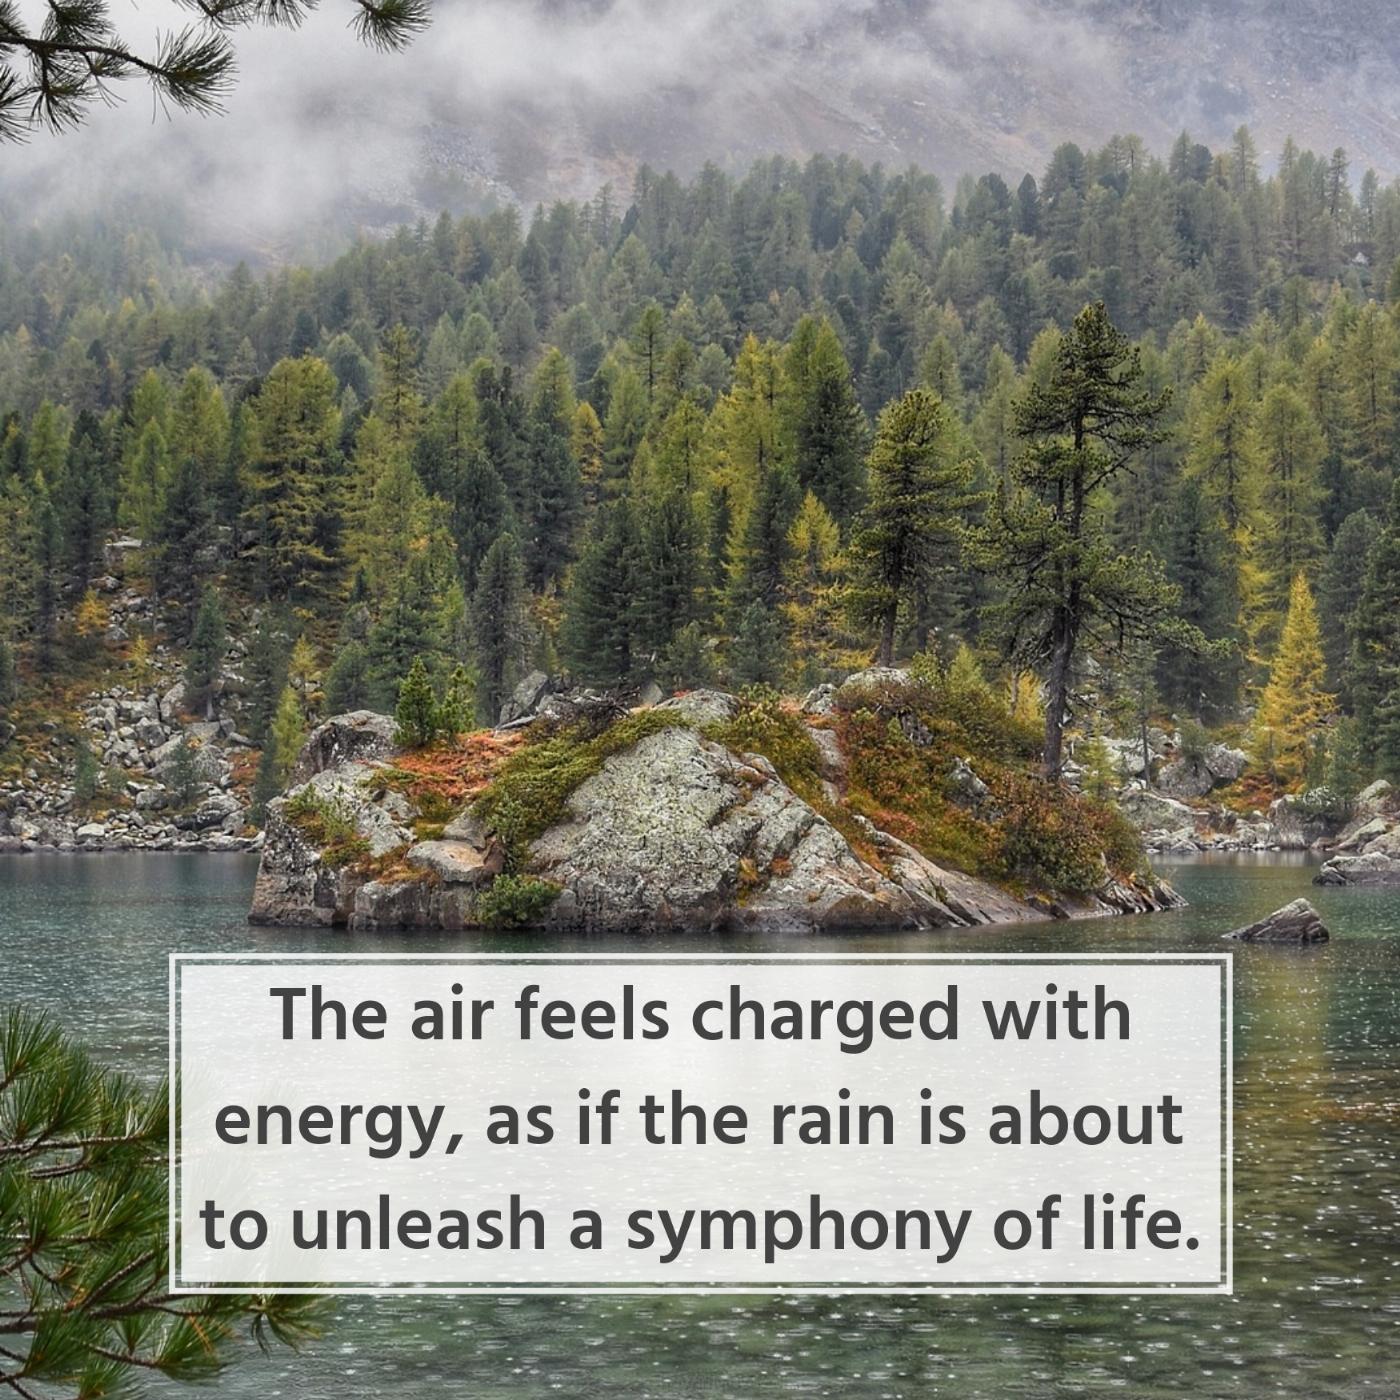 The air feels charged with energy as if the rain is about to unleash